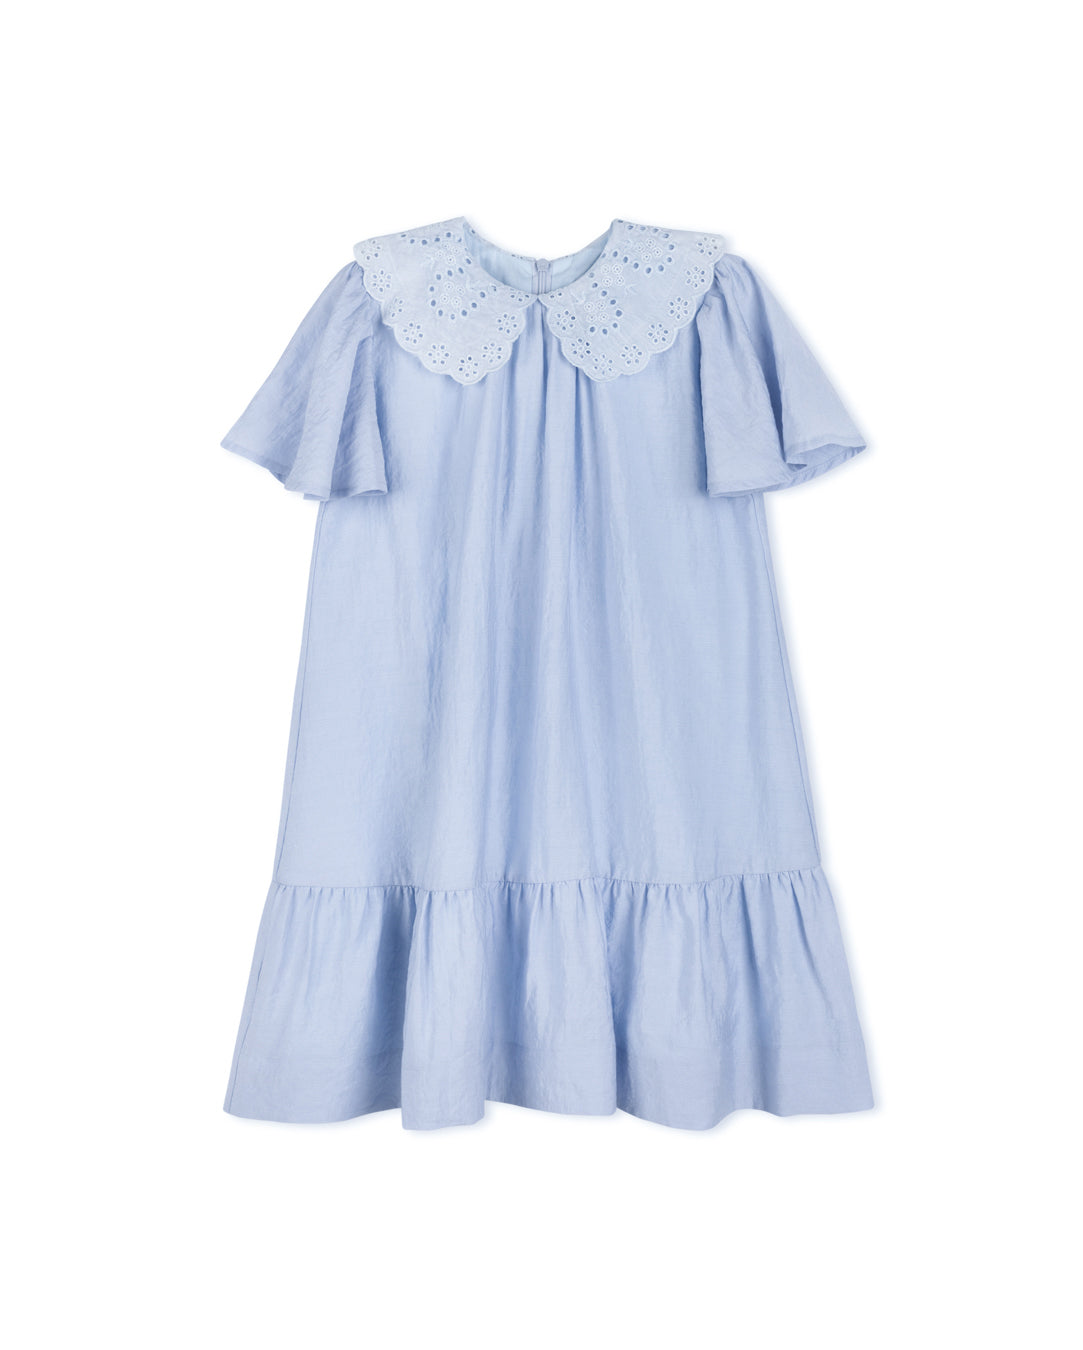 ONE CHILD LIGHT BLUE LINEN SWING LACE COLLARED DRESS